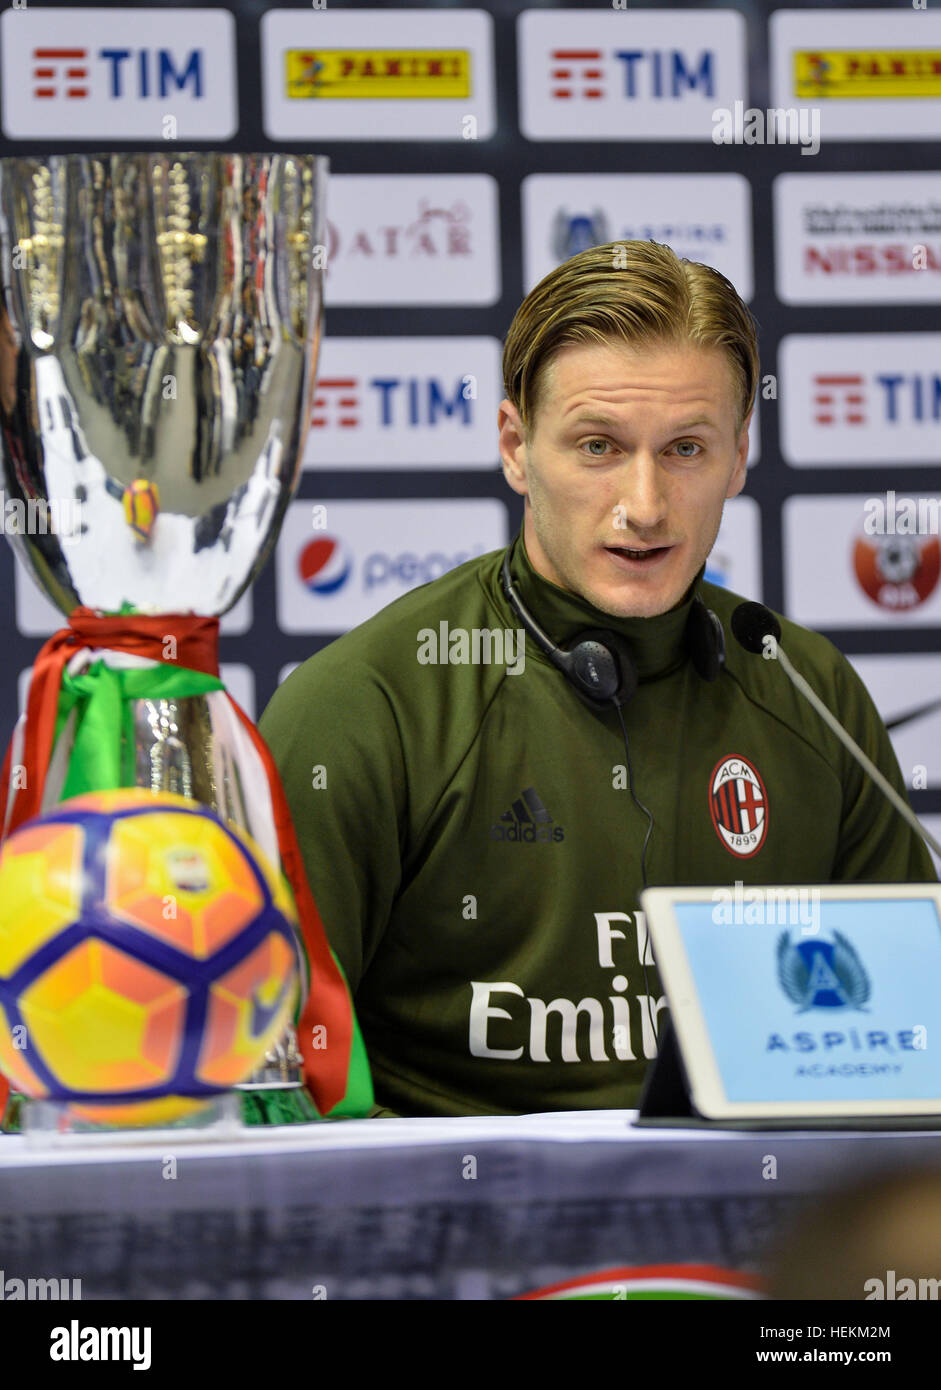 (161223) -- DOHA, Dec. 23, 2016, (Xinhua) -- AC Milan Italian captain and defender Ignazio Abate speaks during a press conference before a training session at Al Sadd stadium in Doha, capital of Qatar, on Dec. 22, 2016. AC Milan will face Juventus in the Italian Super Cup final soccer match at Al Sadd stadium on 23 Dec. 2016. (Xinhua/Nikku) Stock Photo